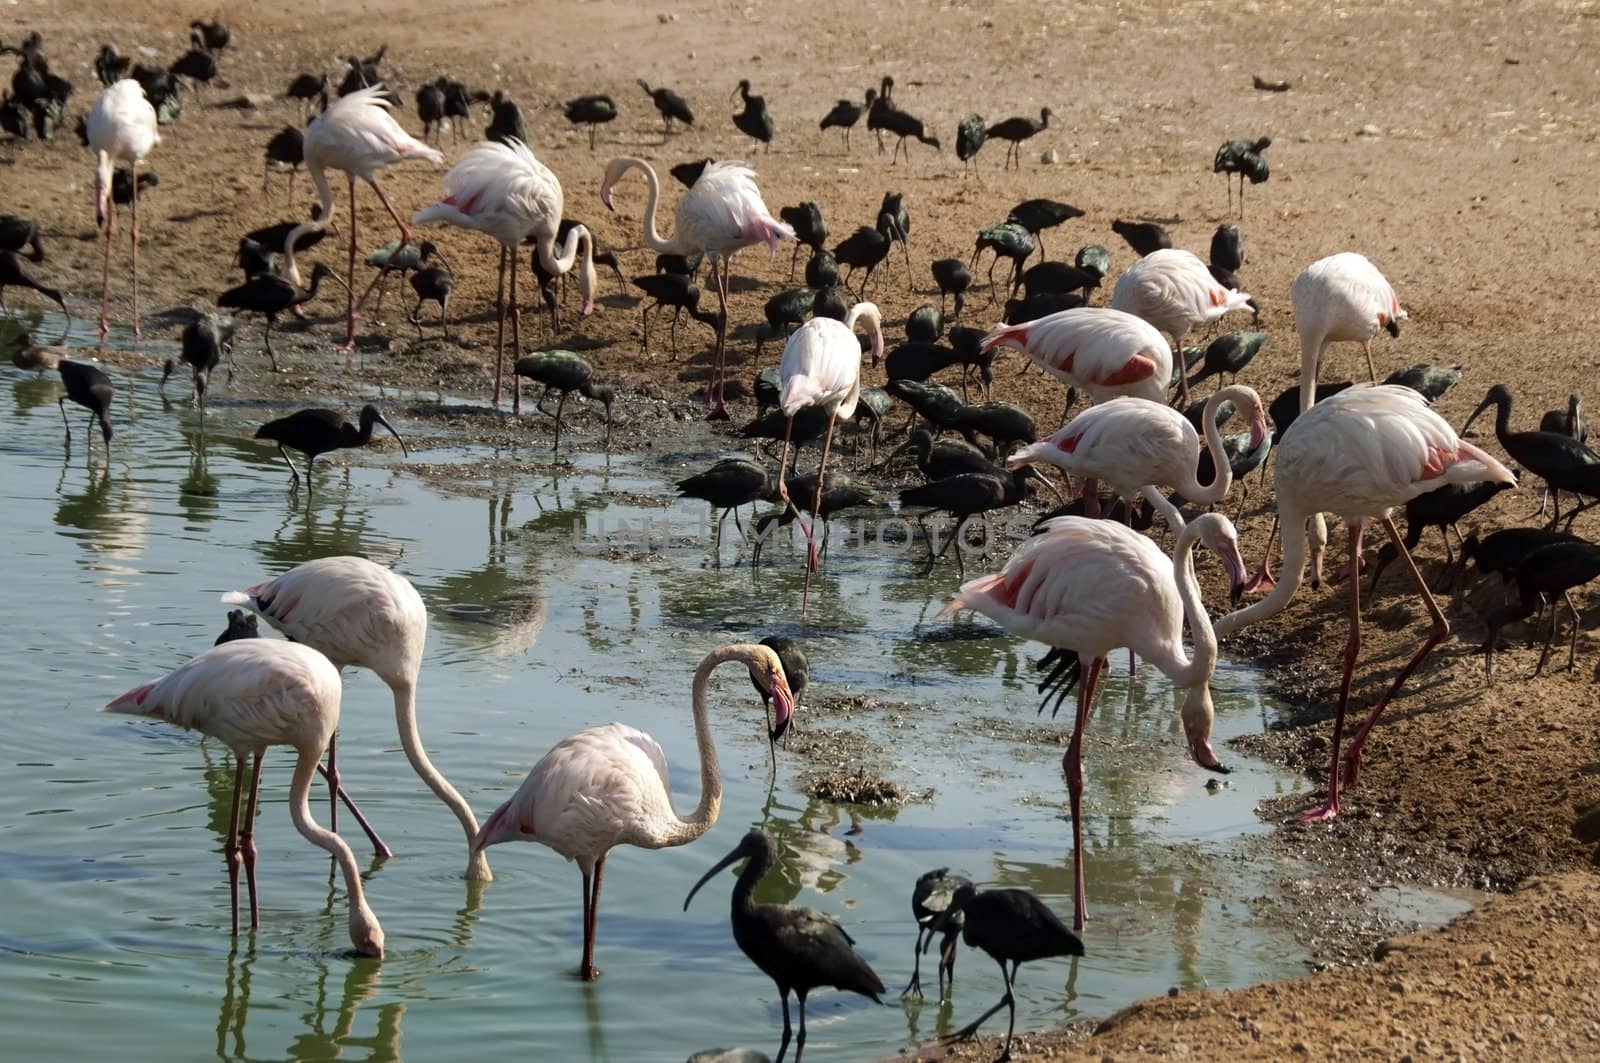 pink flamingos and black herons feed on small pond in a safari